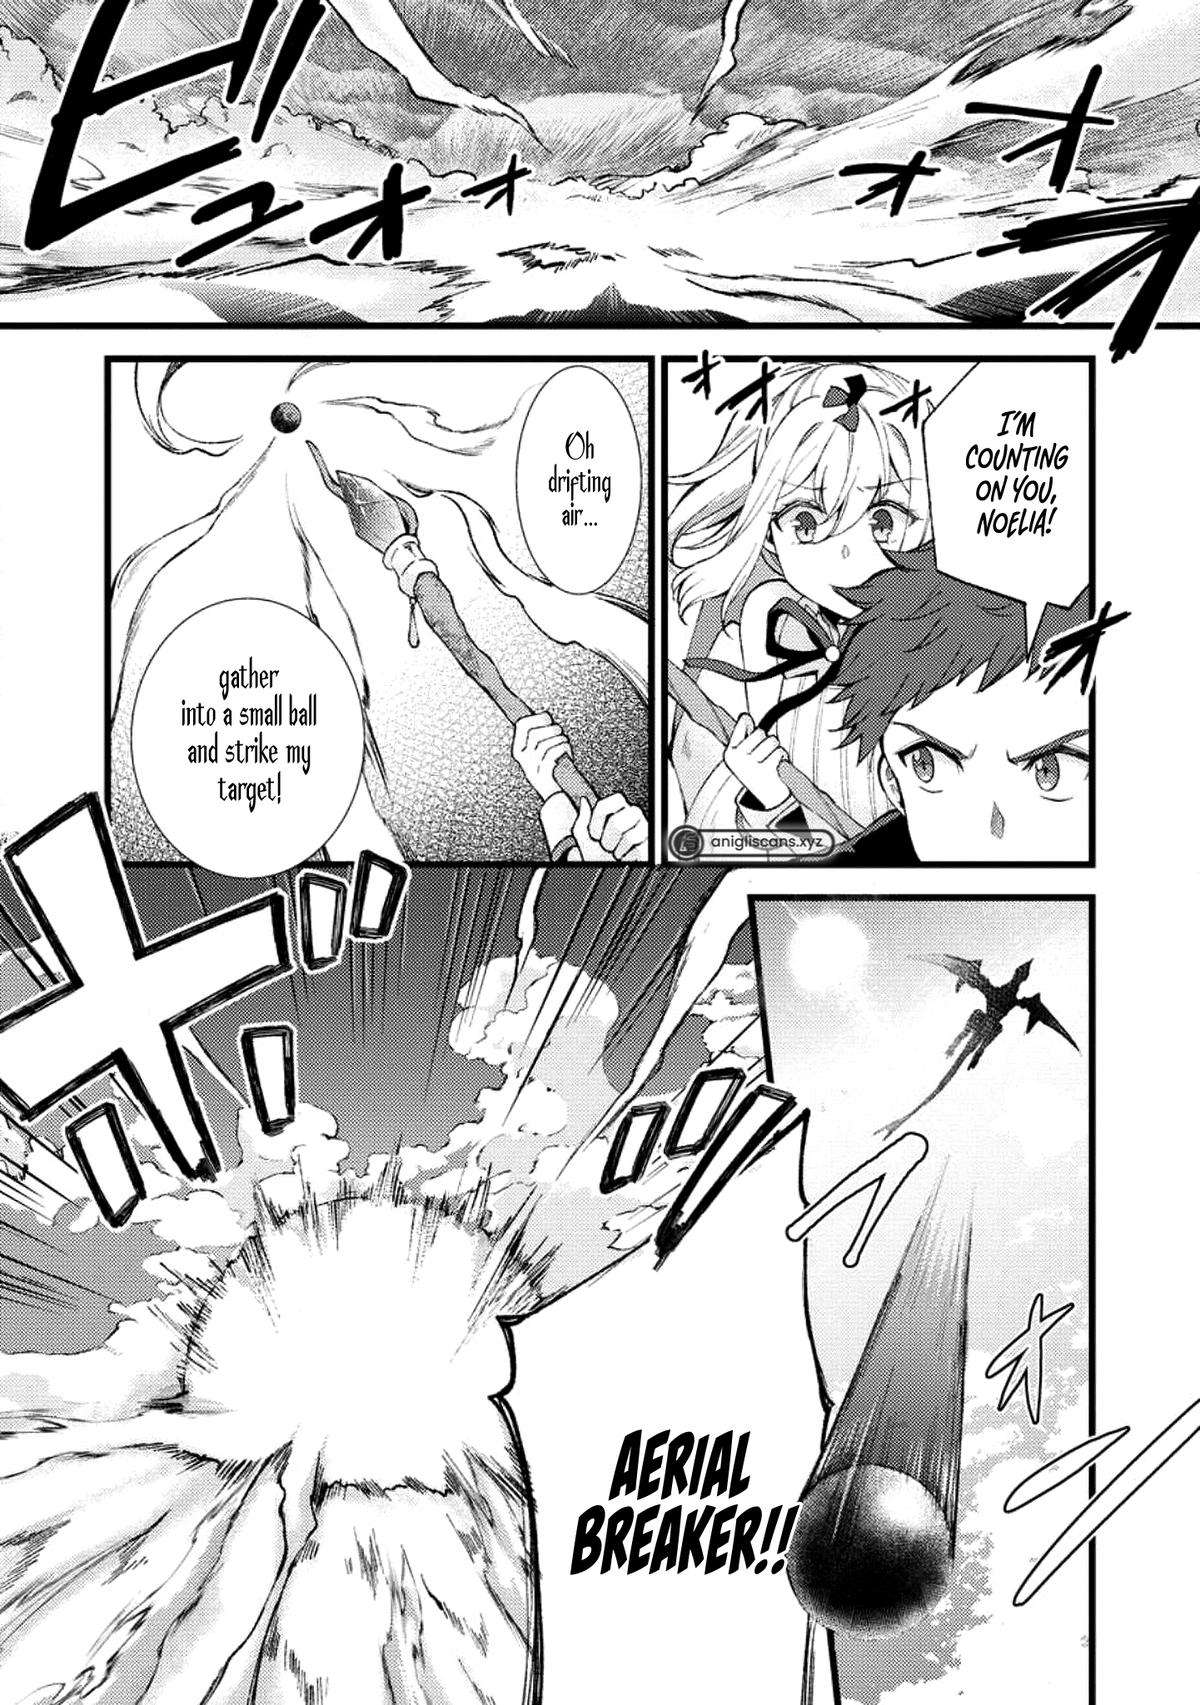 A Sword Master Childhood Friend Power Harassed Me Harshly - chapter 23 - #2